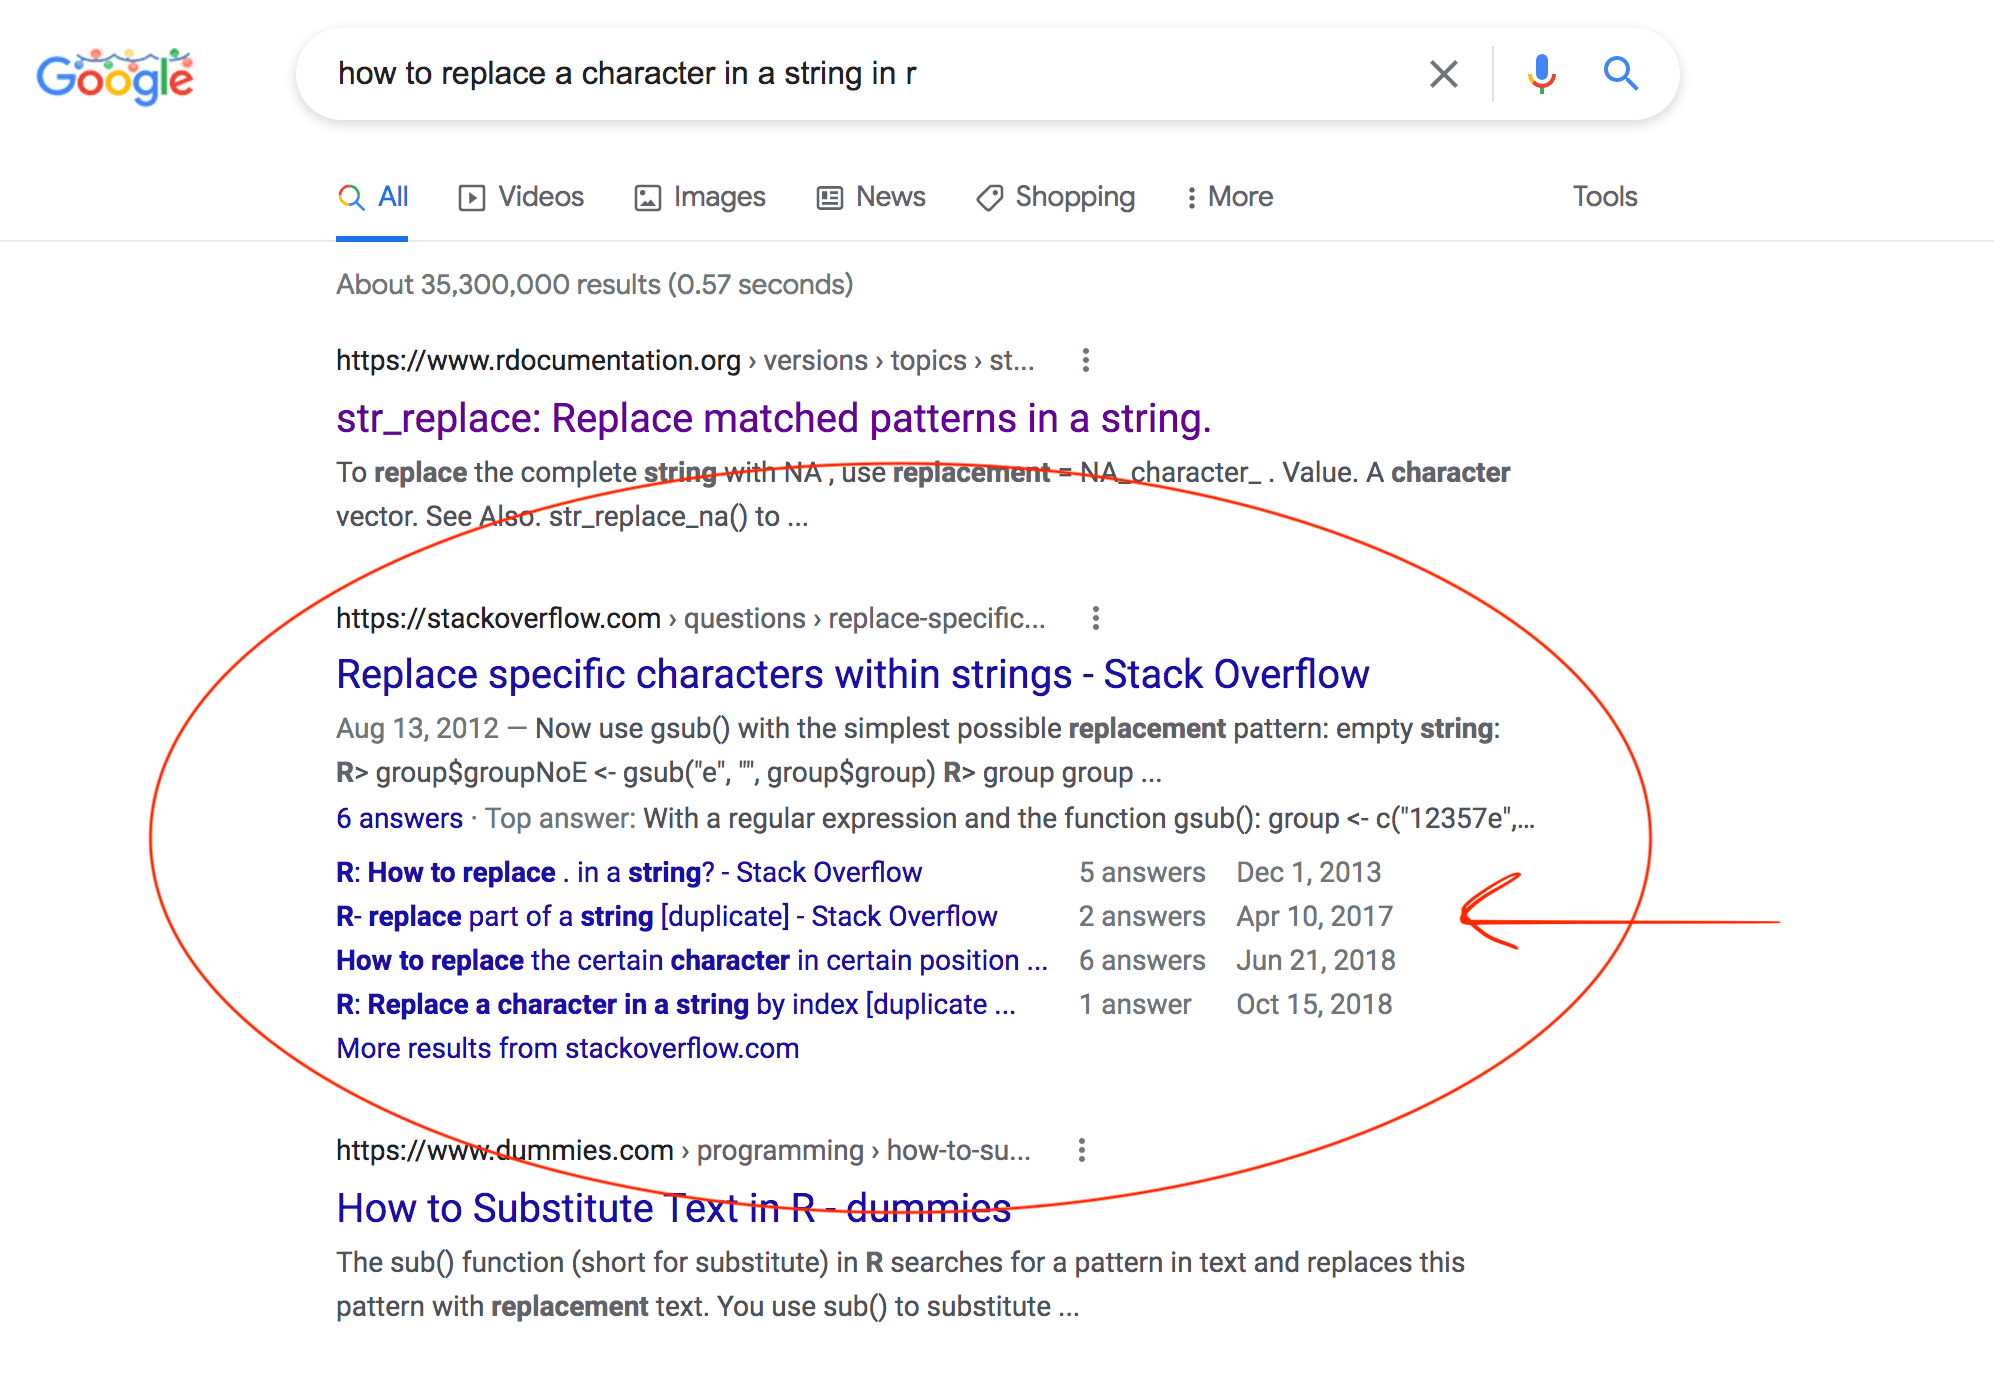 Example google search of How to replace a character in a string in R with the second result circled with a red circle and arrow pointing to it.